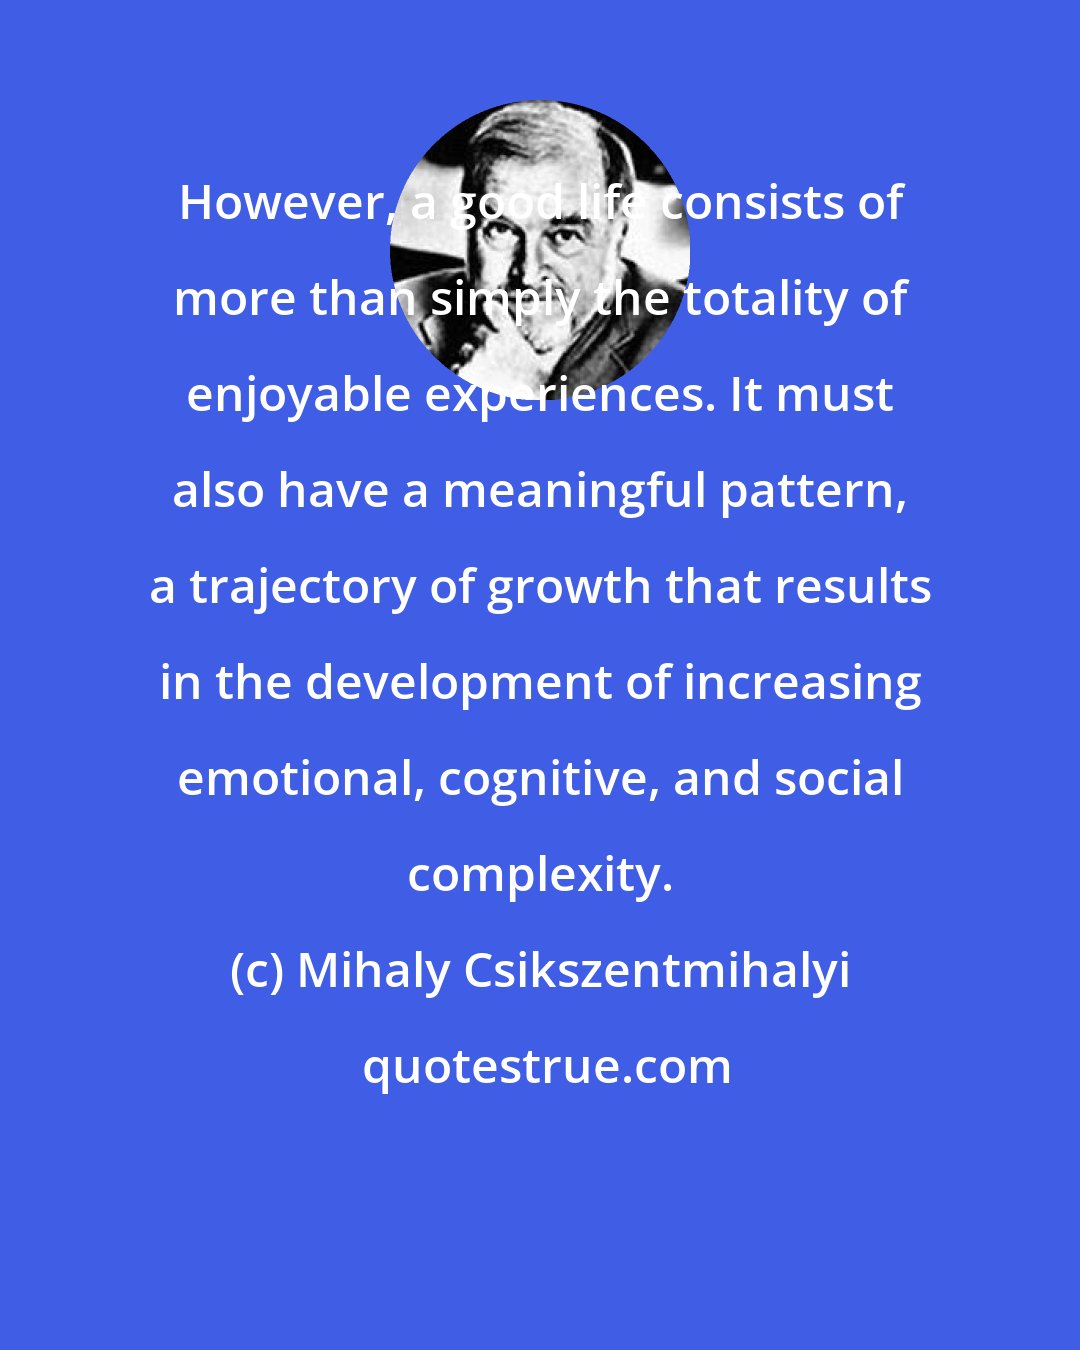 Mihaly Csikszentmihalyi: However, a good life consists of more than simply the totality of enjoyable experiences. It must also have a meaningful pattern, a trajectory of growth that results in the development of increasing emotional, cognitive, and social complexity.